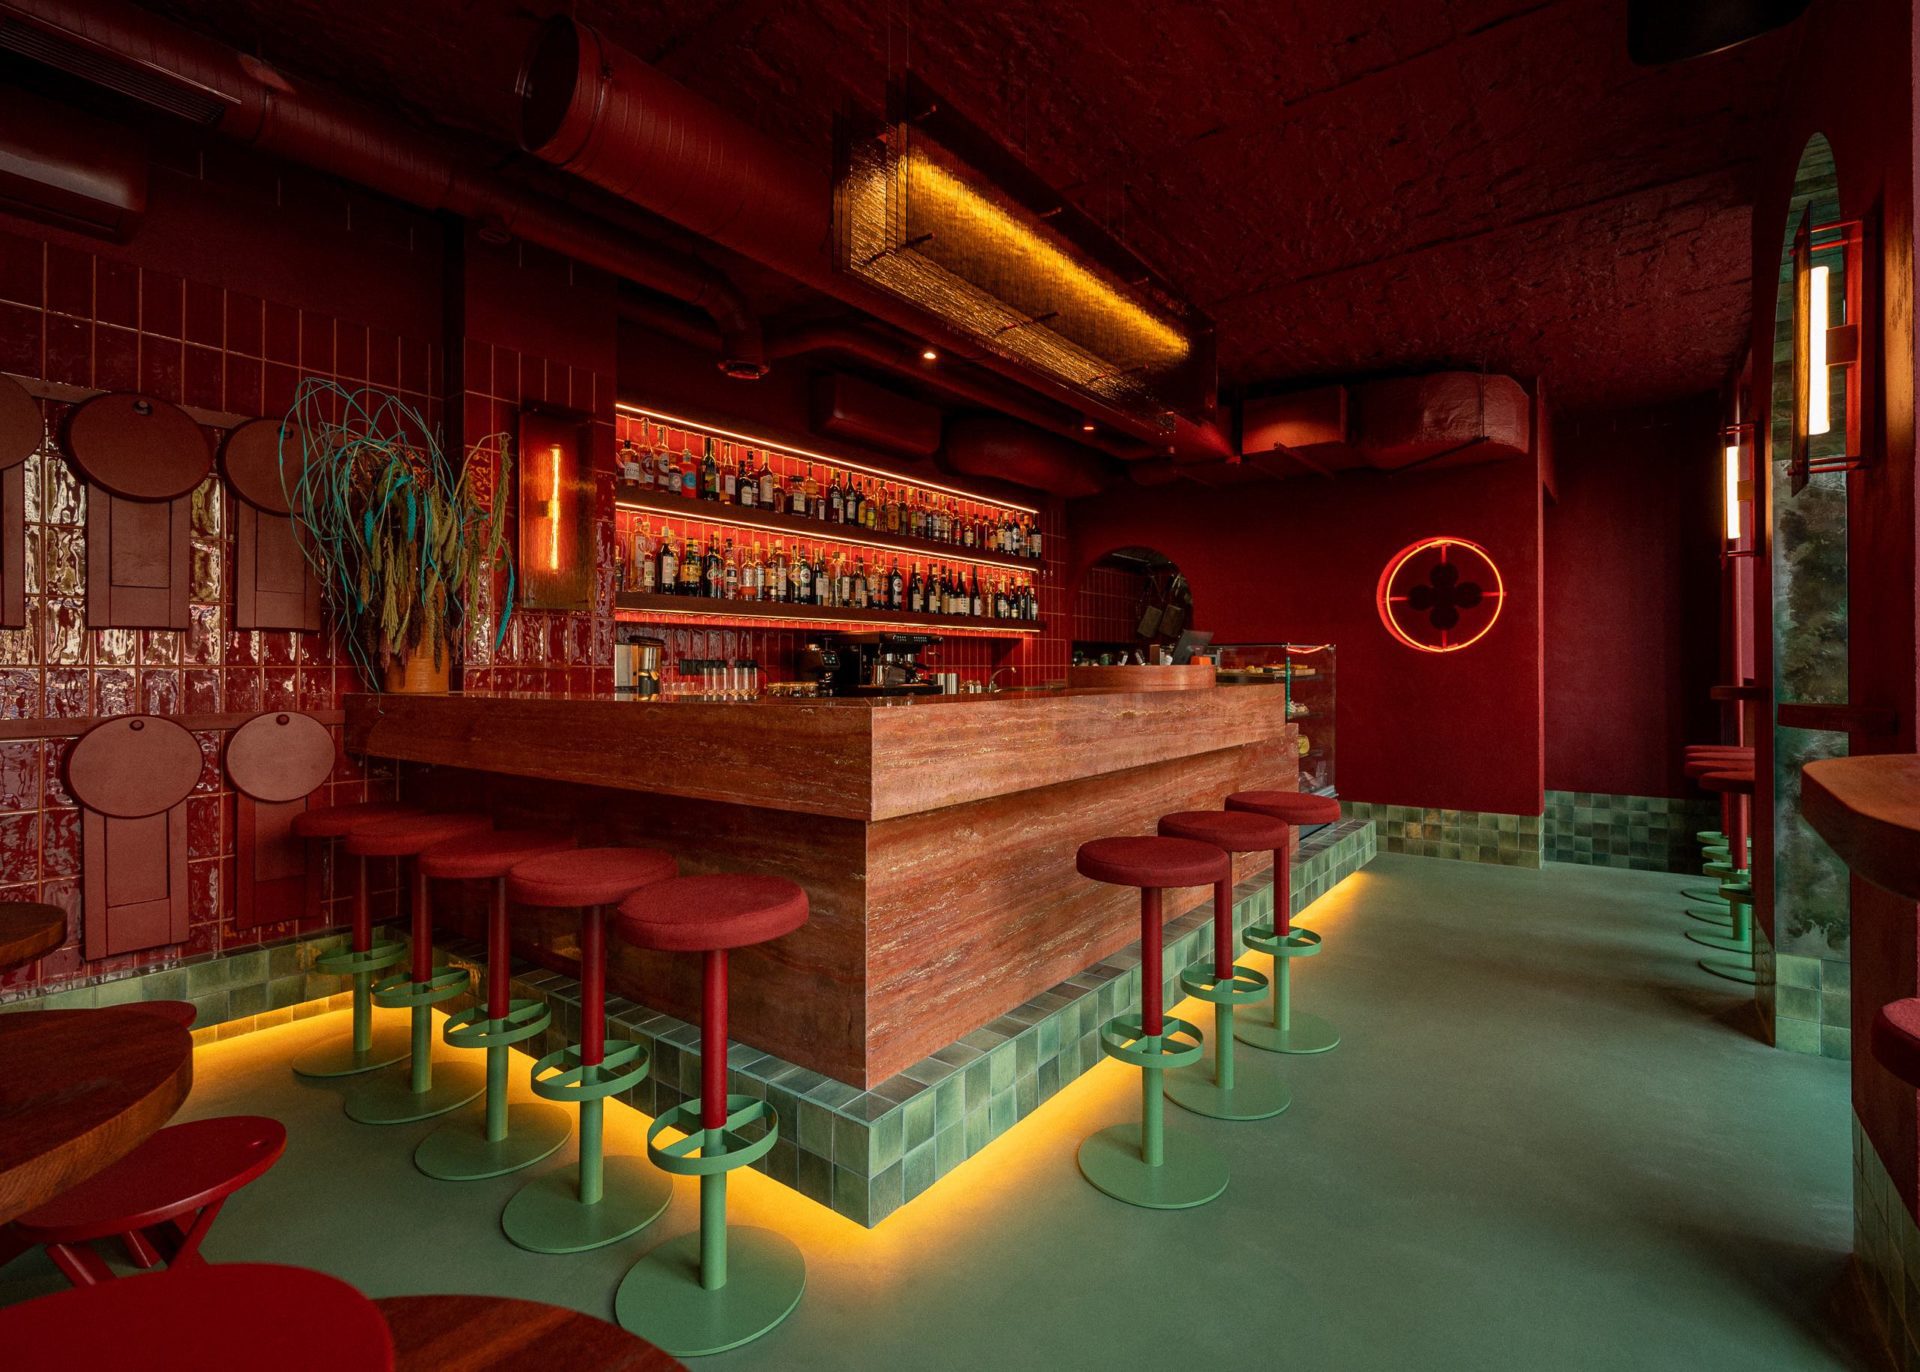 Noke Architects bring the experience of Venice to a bar in Warsaw